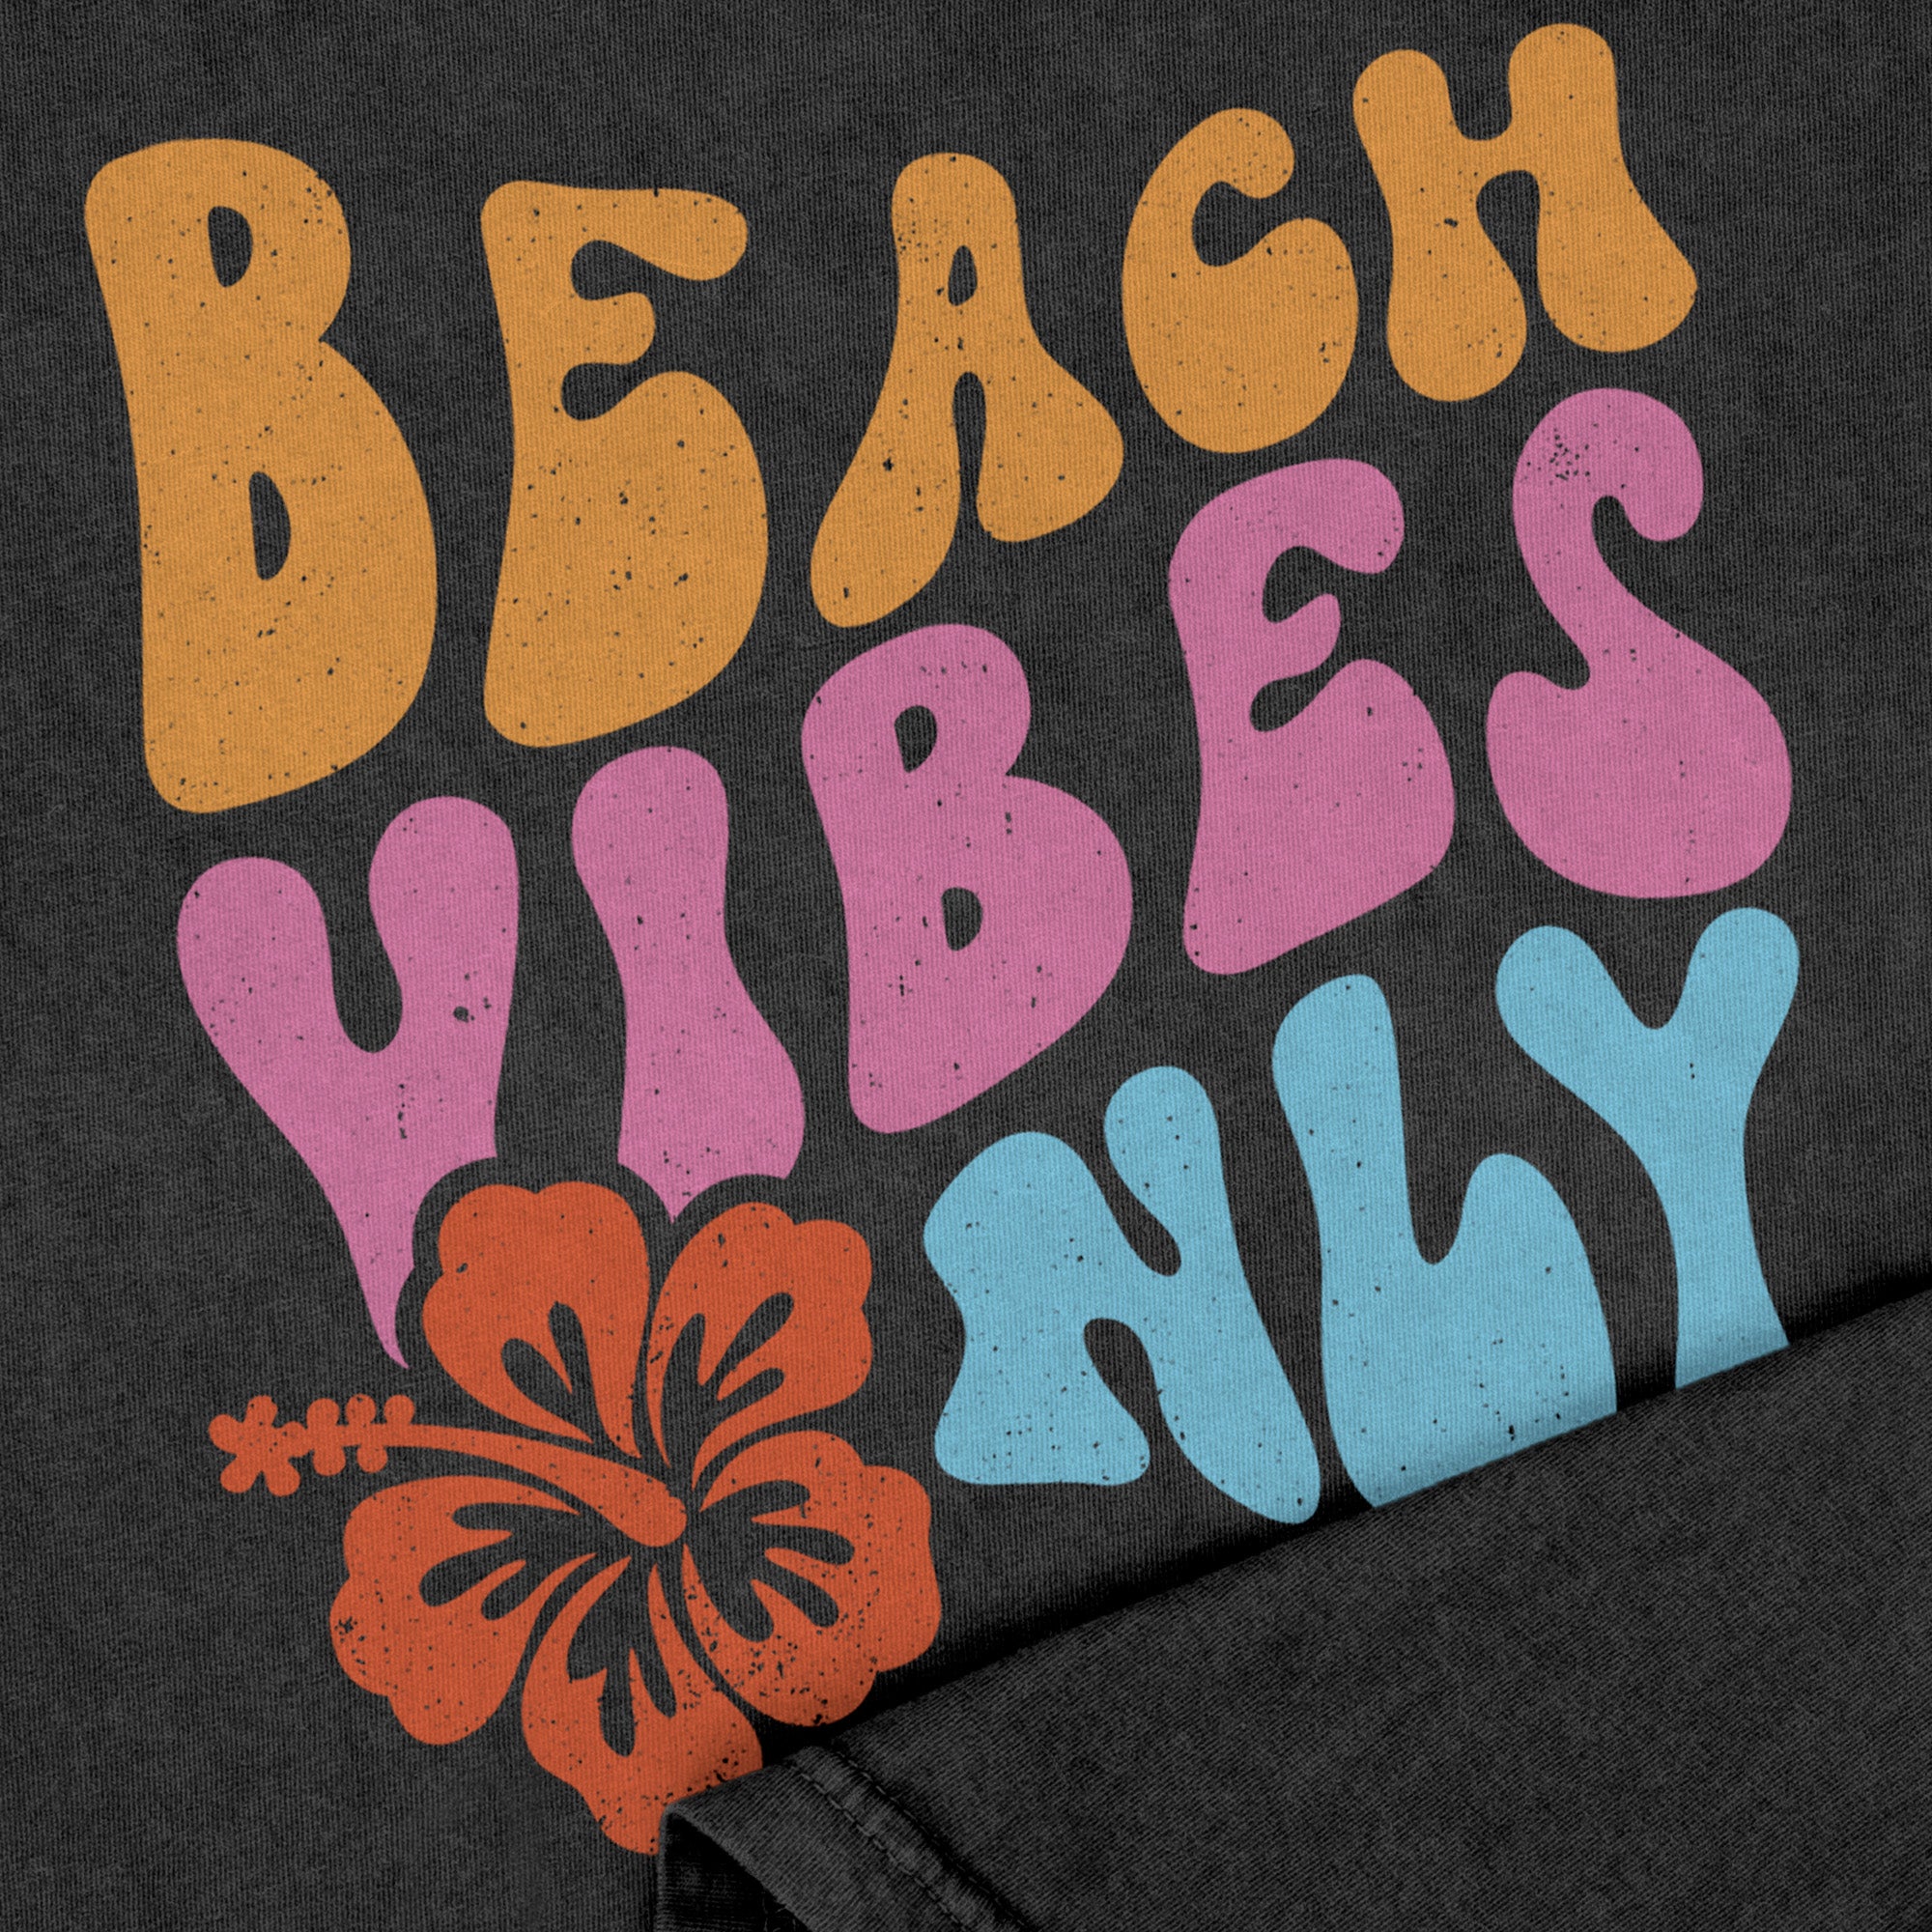 Beach Vibes Only Oversized Shirt Garment-Dyed Graphic Tee